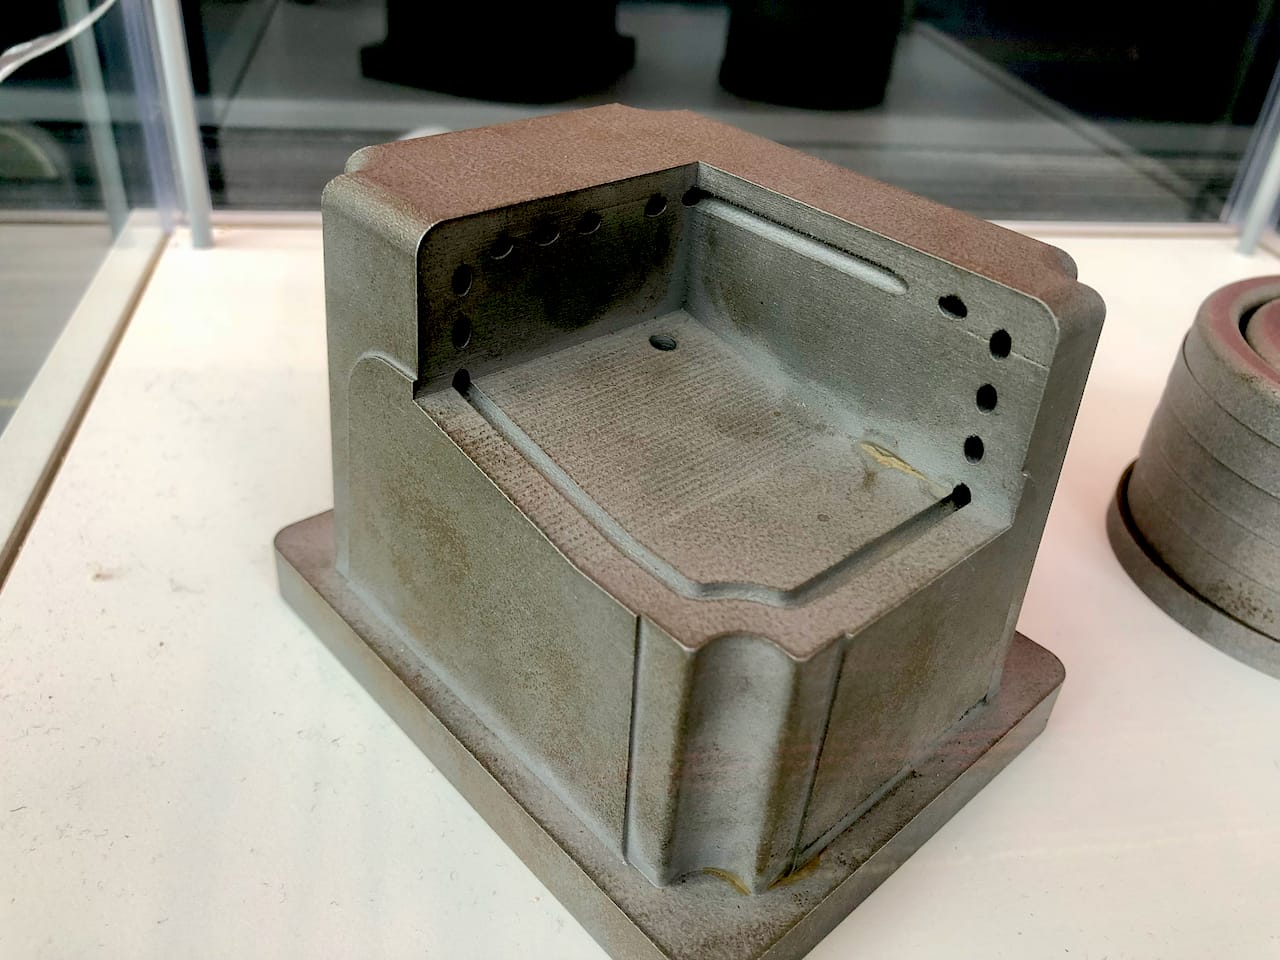  A 3D printed metal production mold showing venting holes [Source: Fabbaloo] 